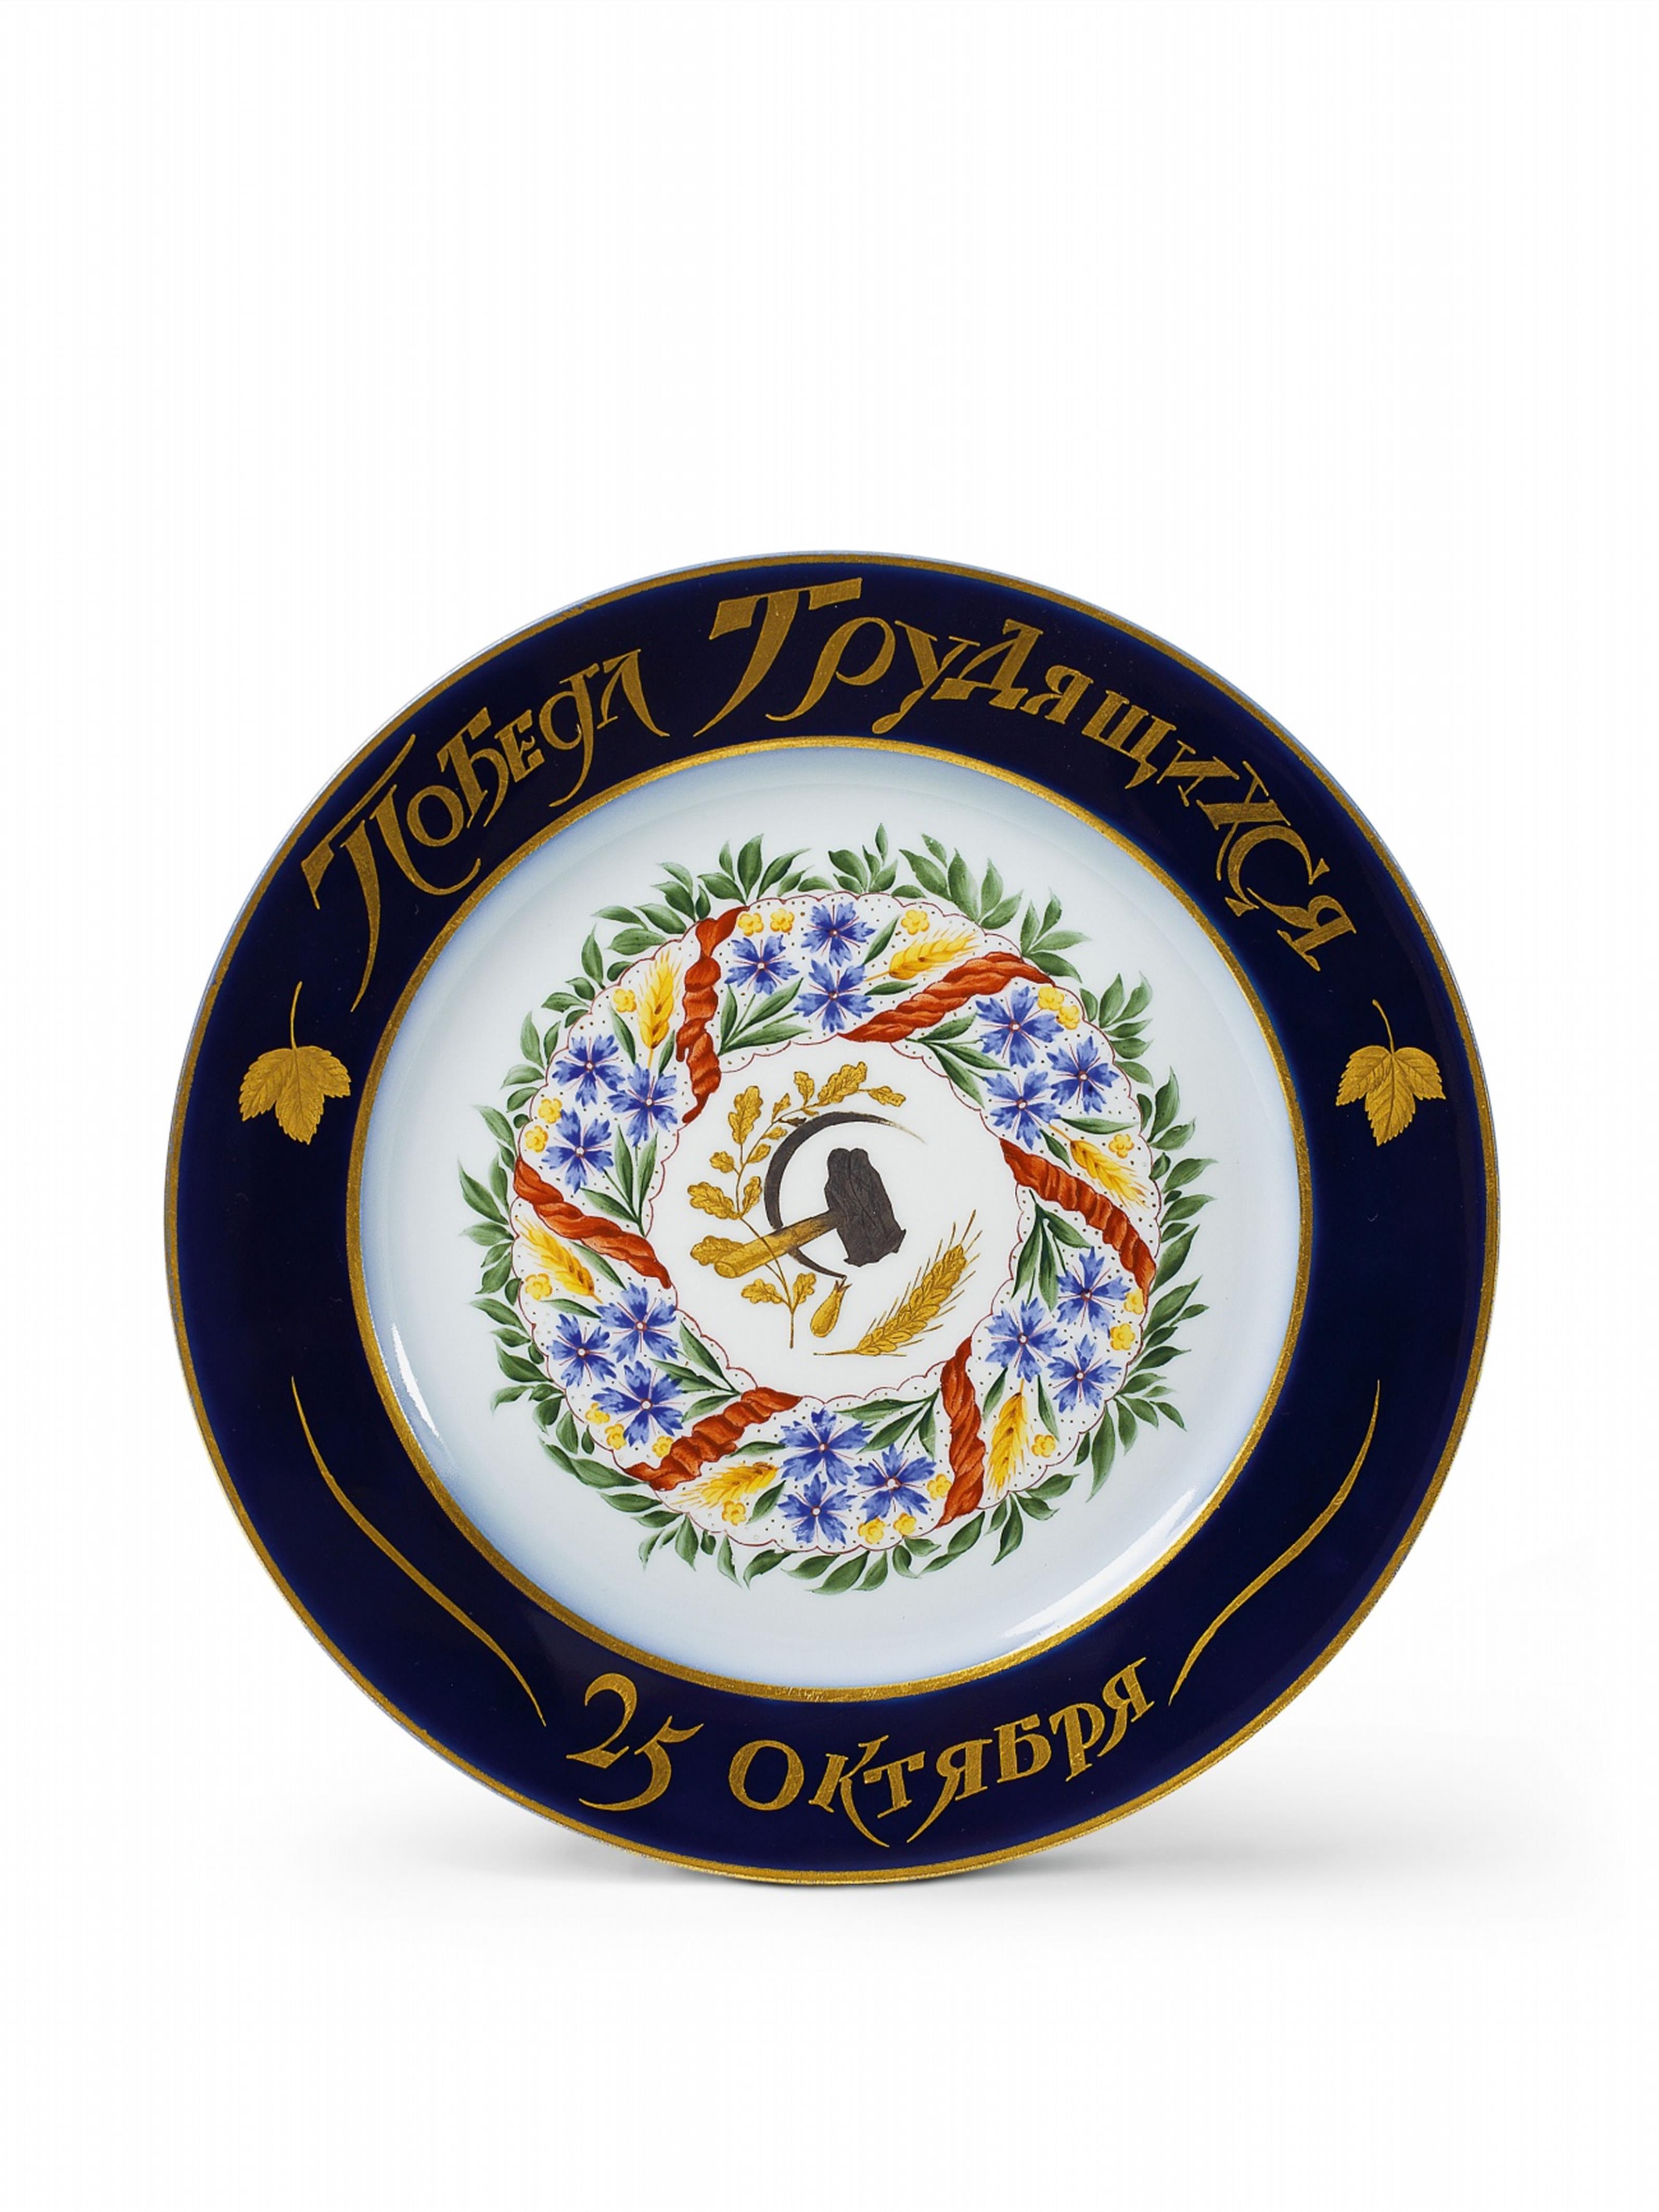 A porcelain plate centrally decorated with a wreath commemorating the October Revolution, inscribed "Triumph of the labourers 25th October". - image-1